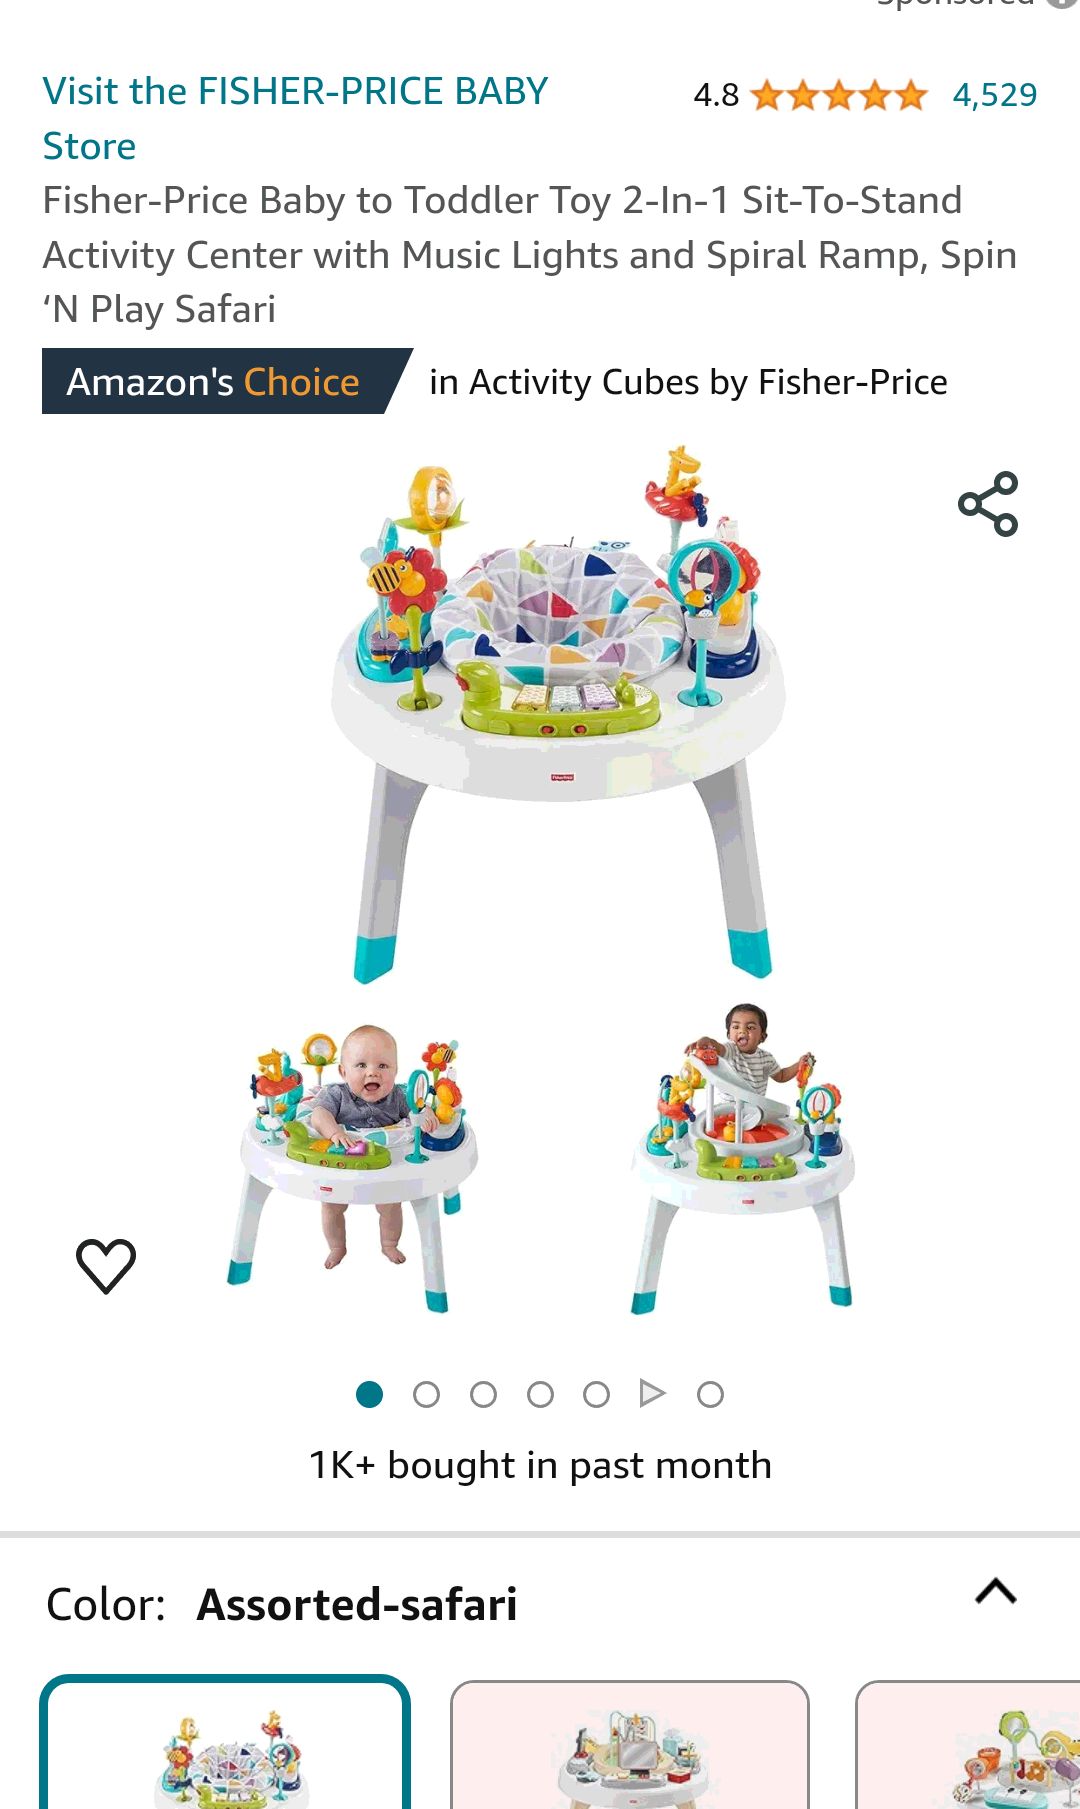 Amazon.com : Fisher-Price Baby to Toddler Toy 2-In-1 Sit-To-Stand Activity Center with Music Lights and Spiral Ramp, Spin ‘N Play Safari : Toys & Games